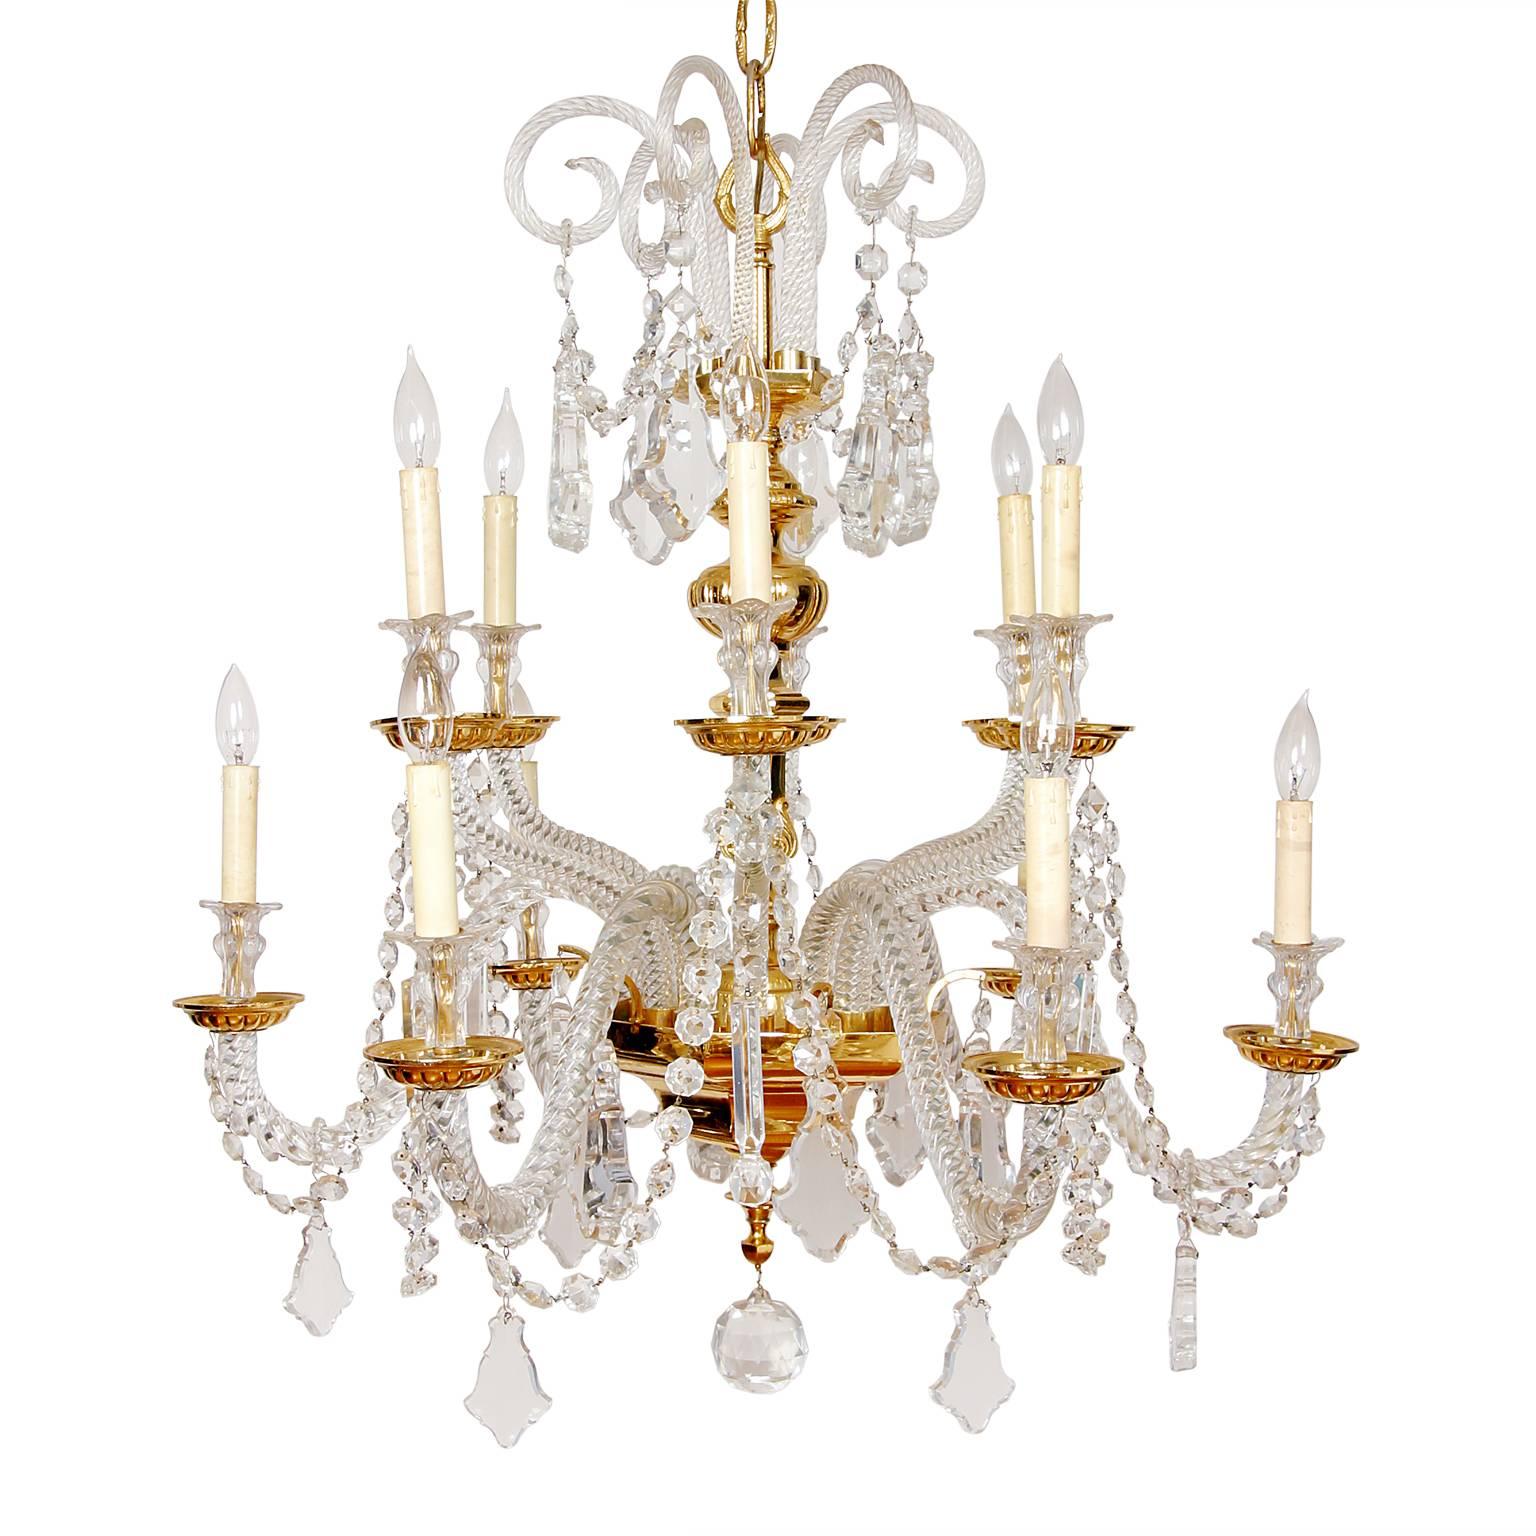 Gold-Plated over Brass and Lead Crystal, Nine-Light, Italian Chandelier For Sale